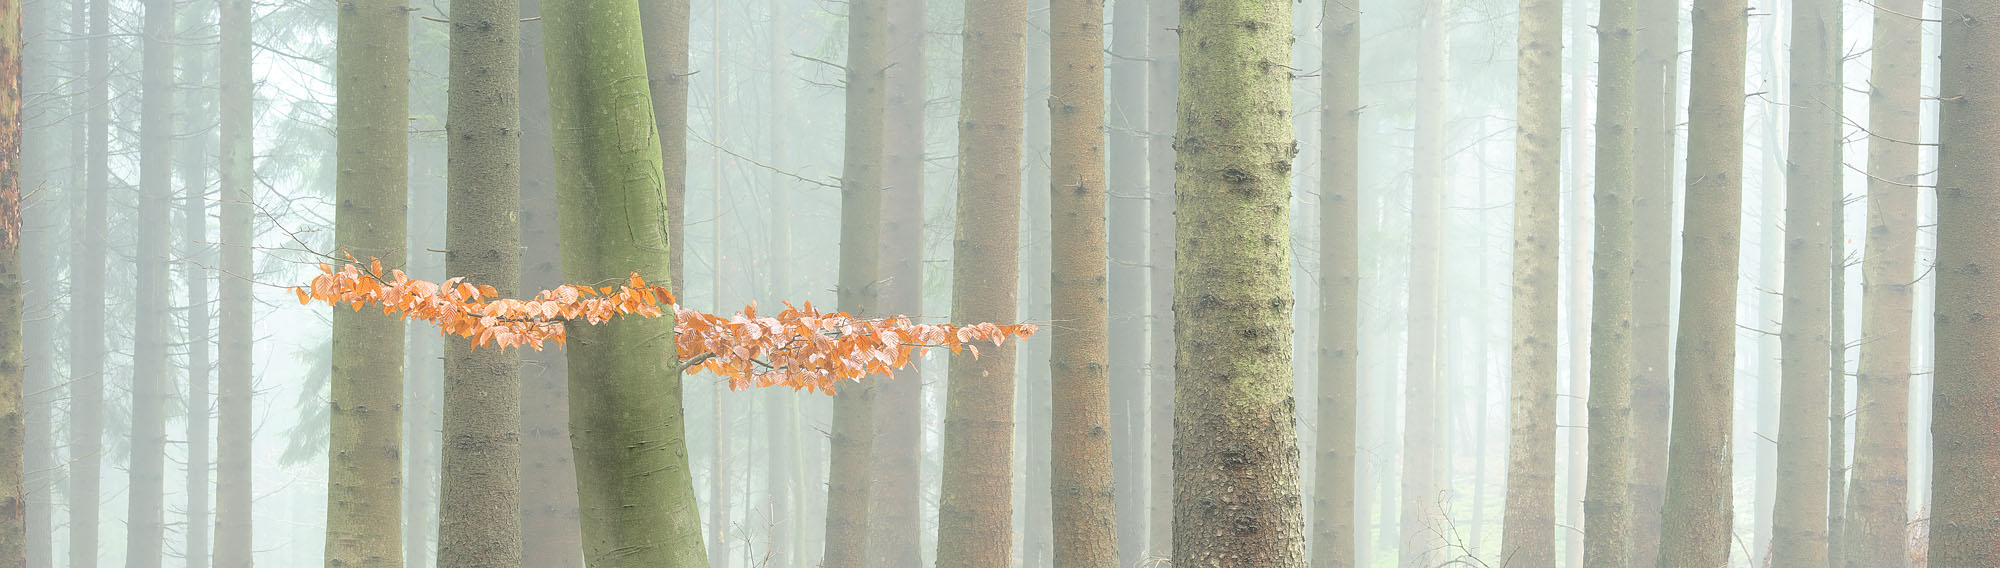 Panorama of beech forest in dense fog with foliage in autumn colors.